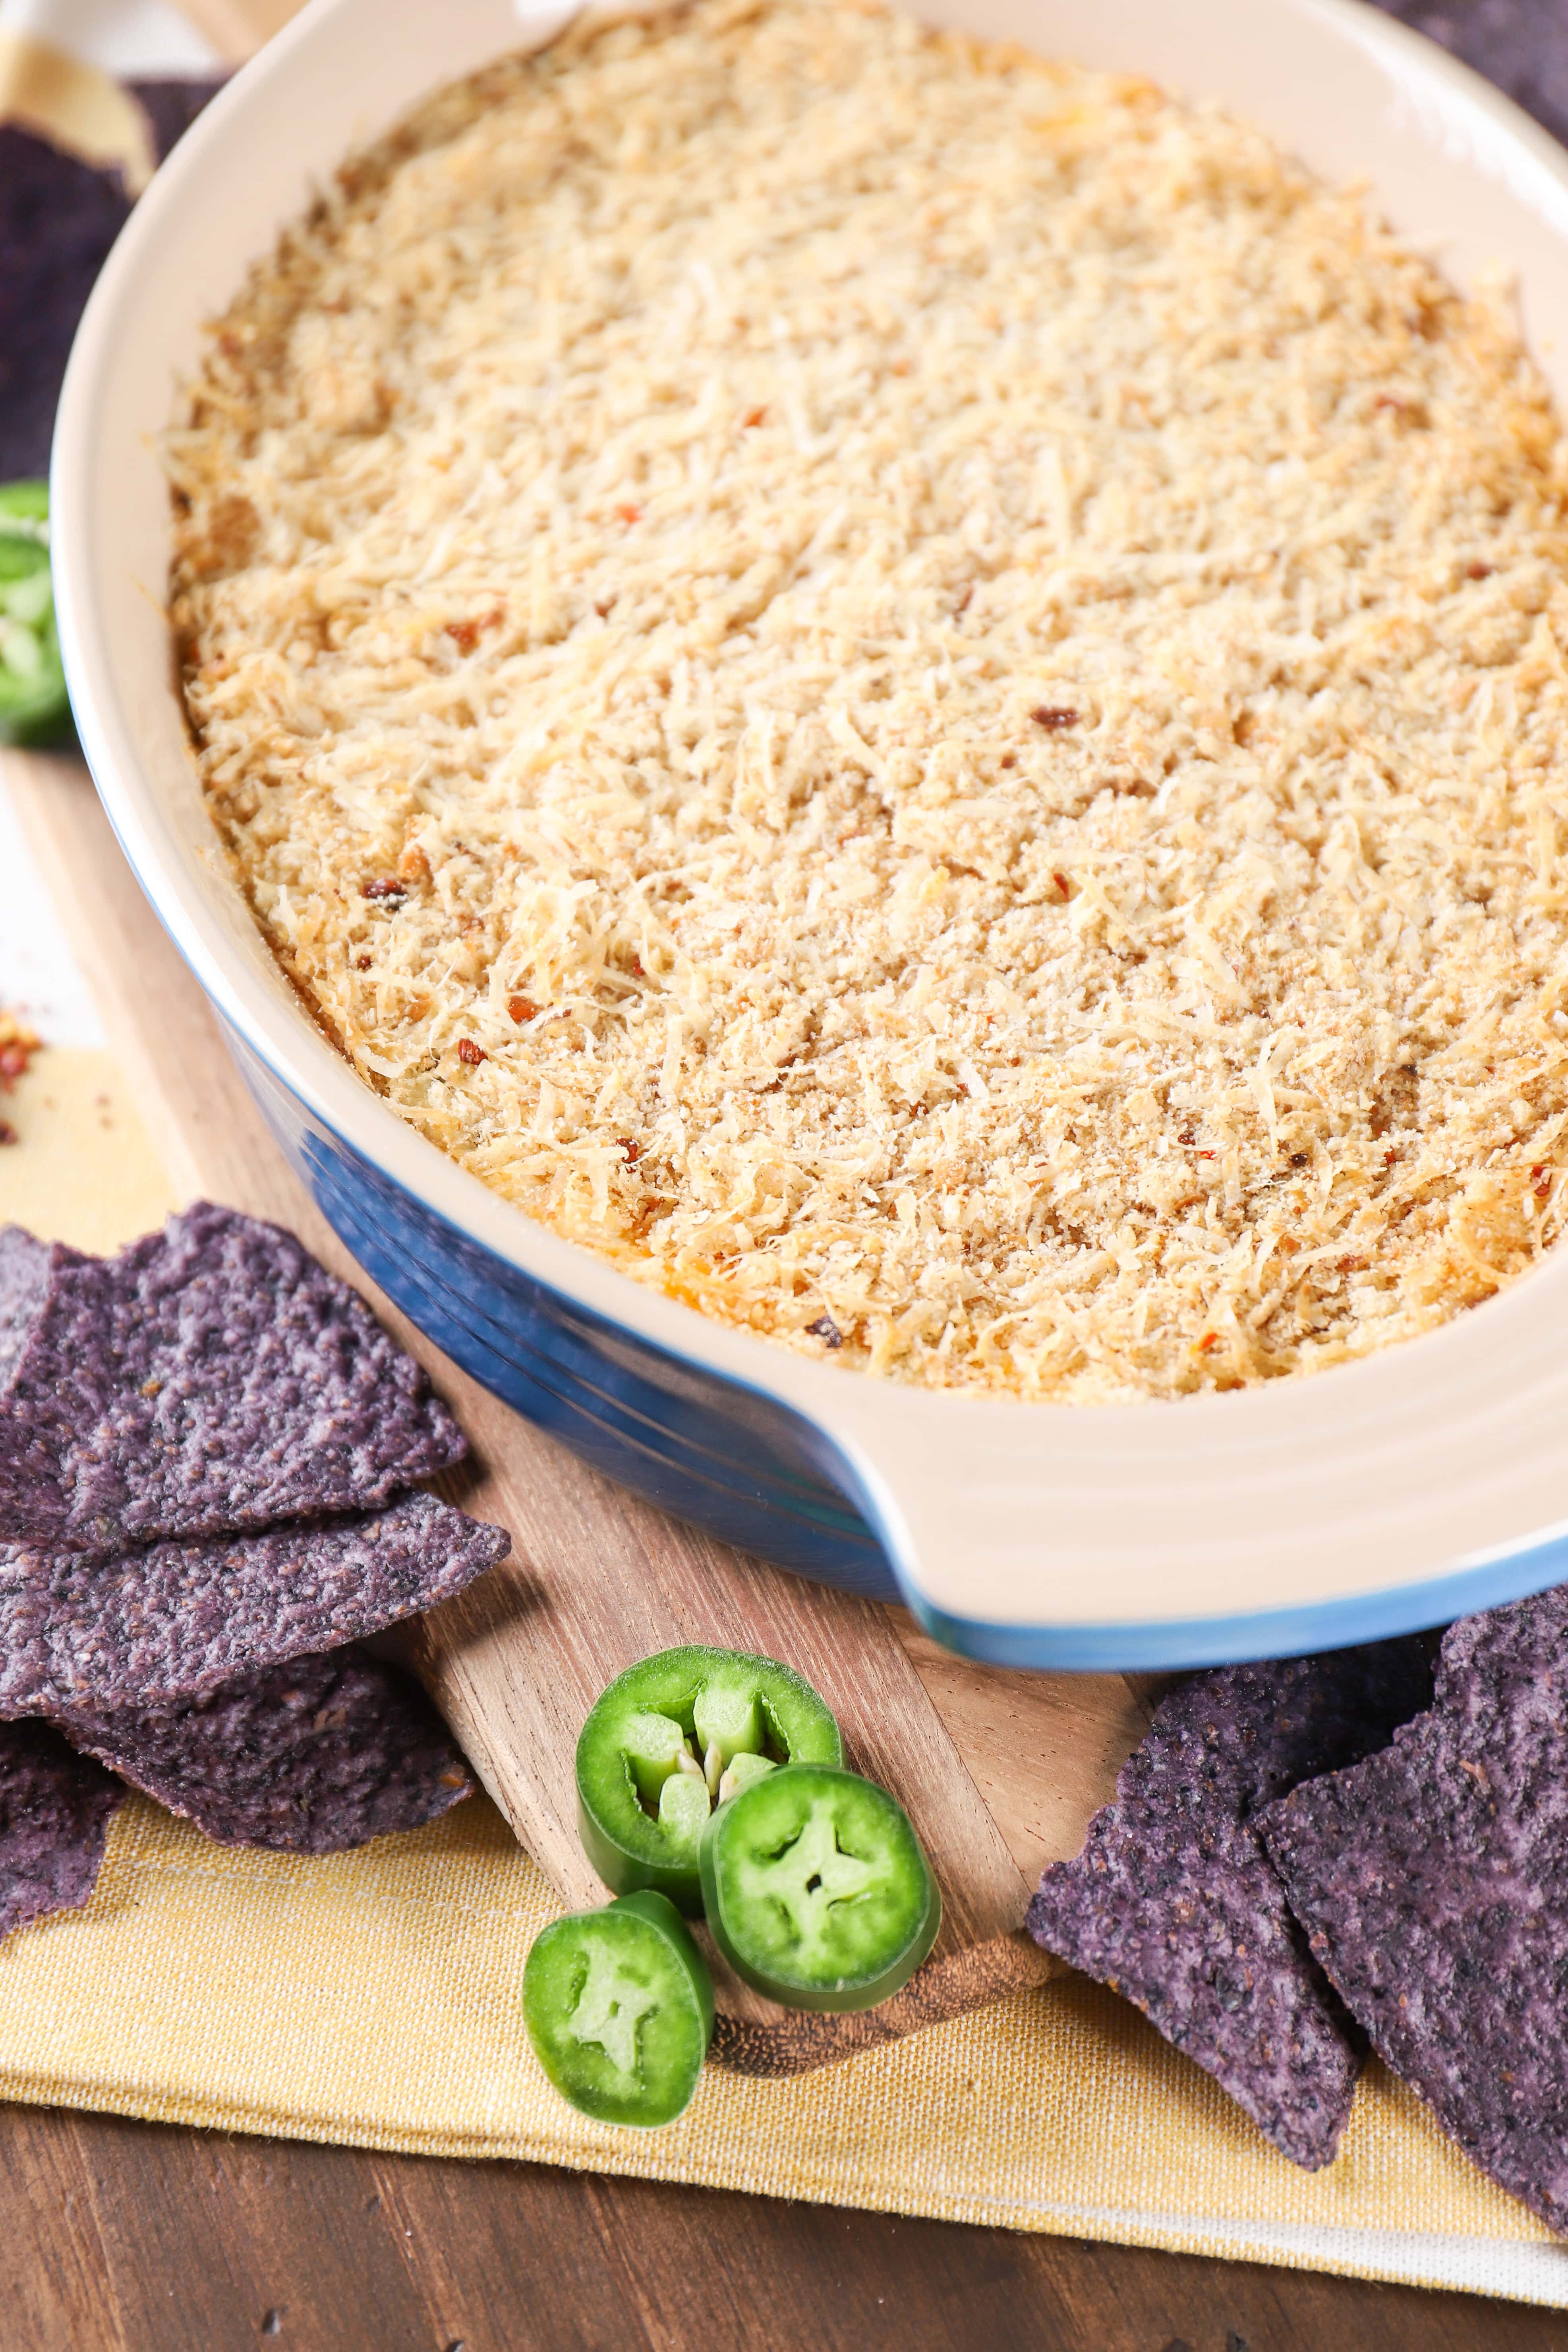 Jalapeno Popper Dip Recipe from A Kitchen Addiction